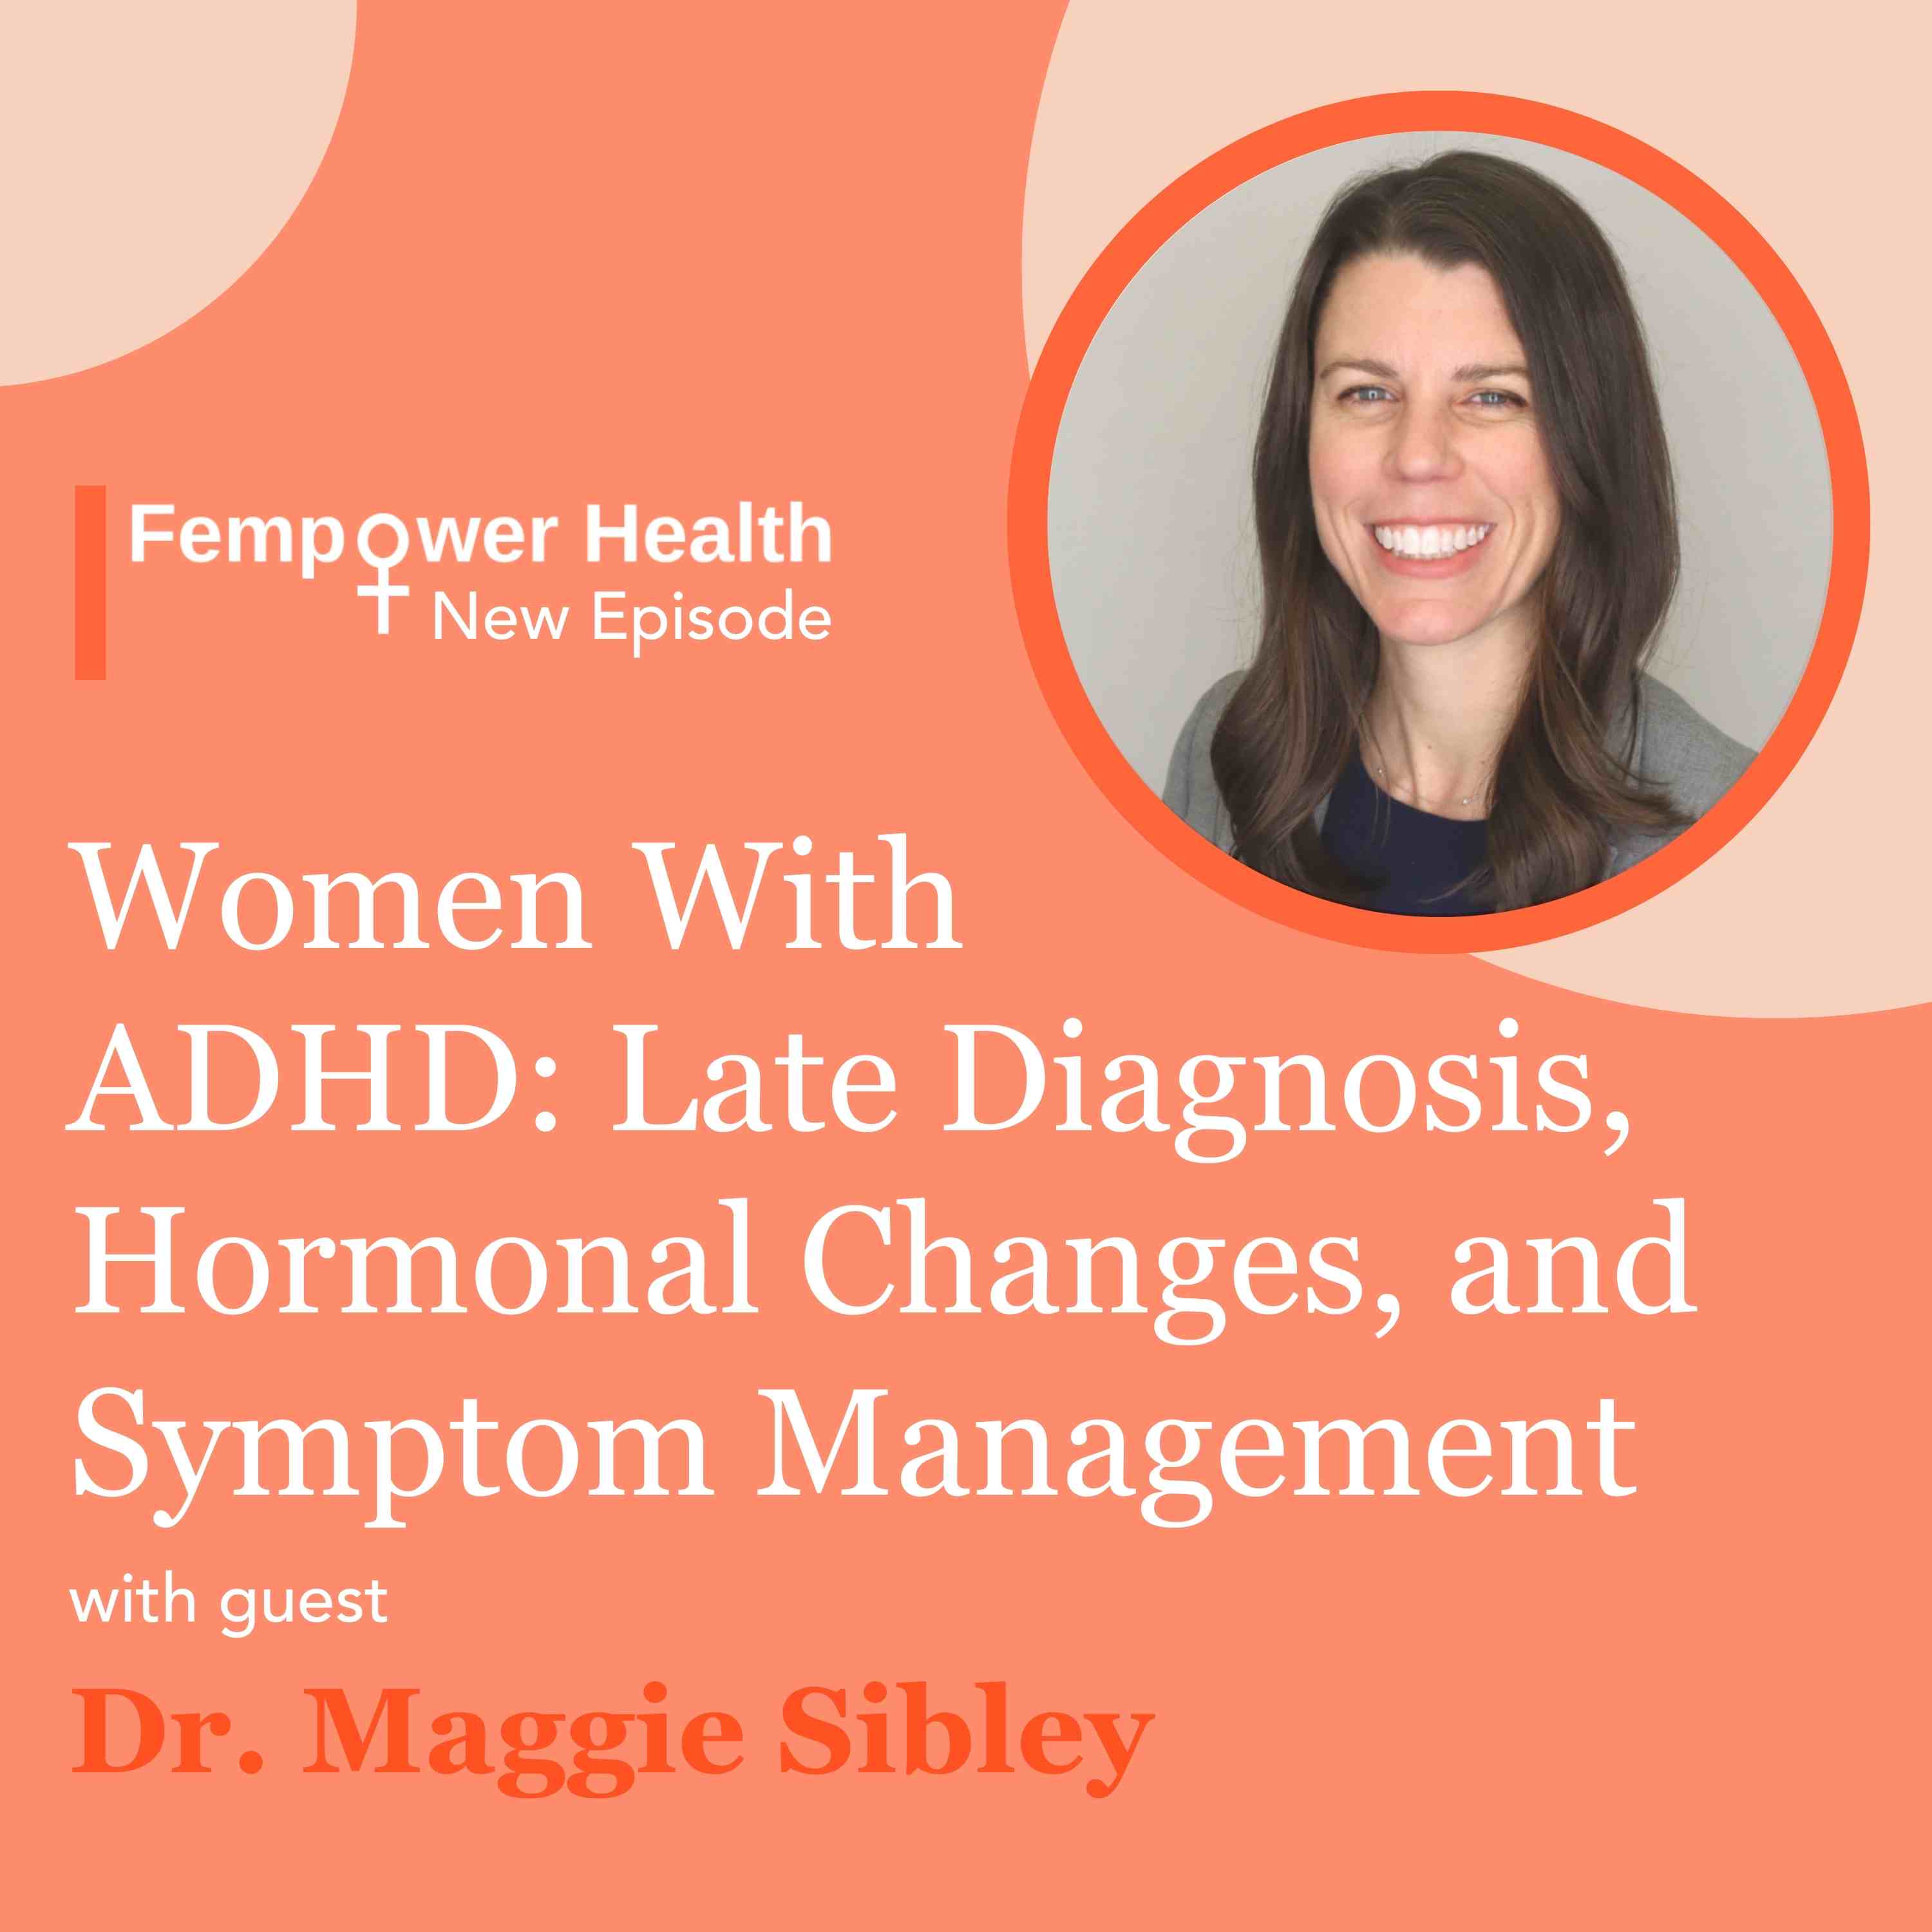 Women With ADHD: Late Diagnosis, Hormonal Changes, and Symptom Management | Dr. Maggie Sibley